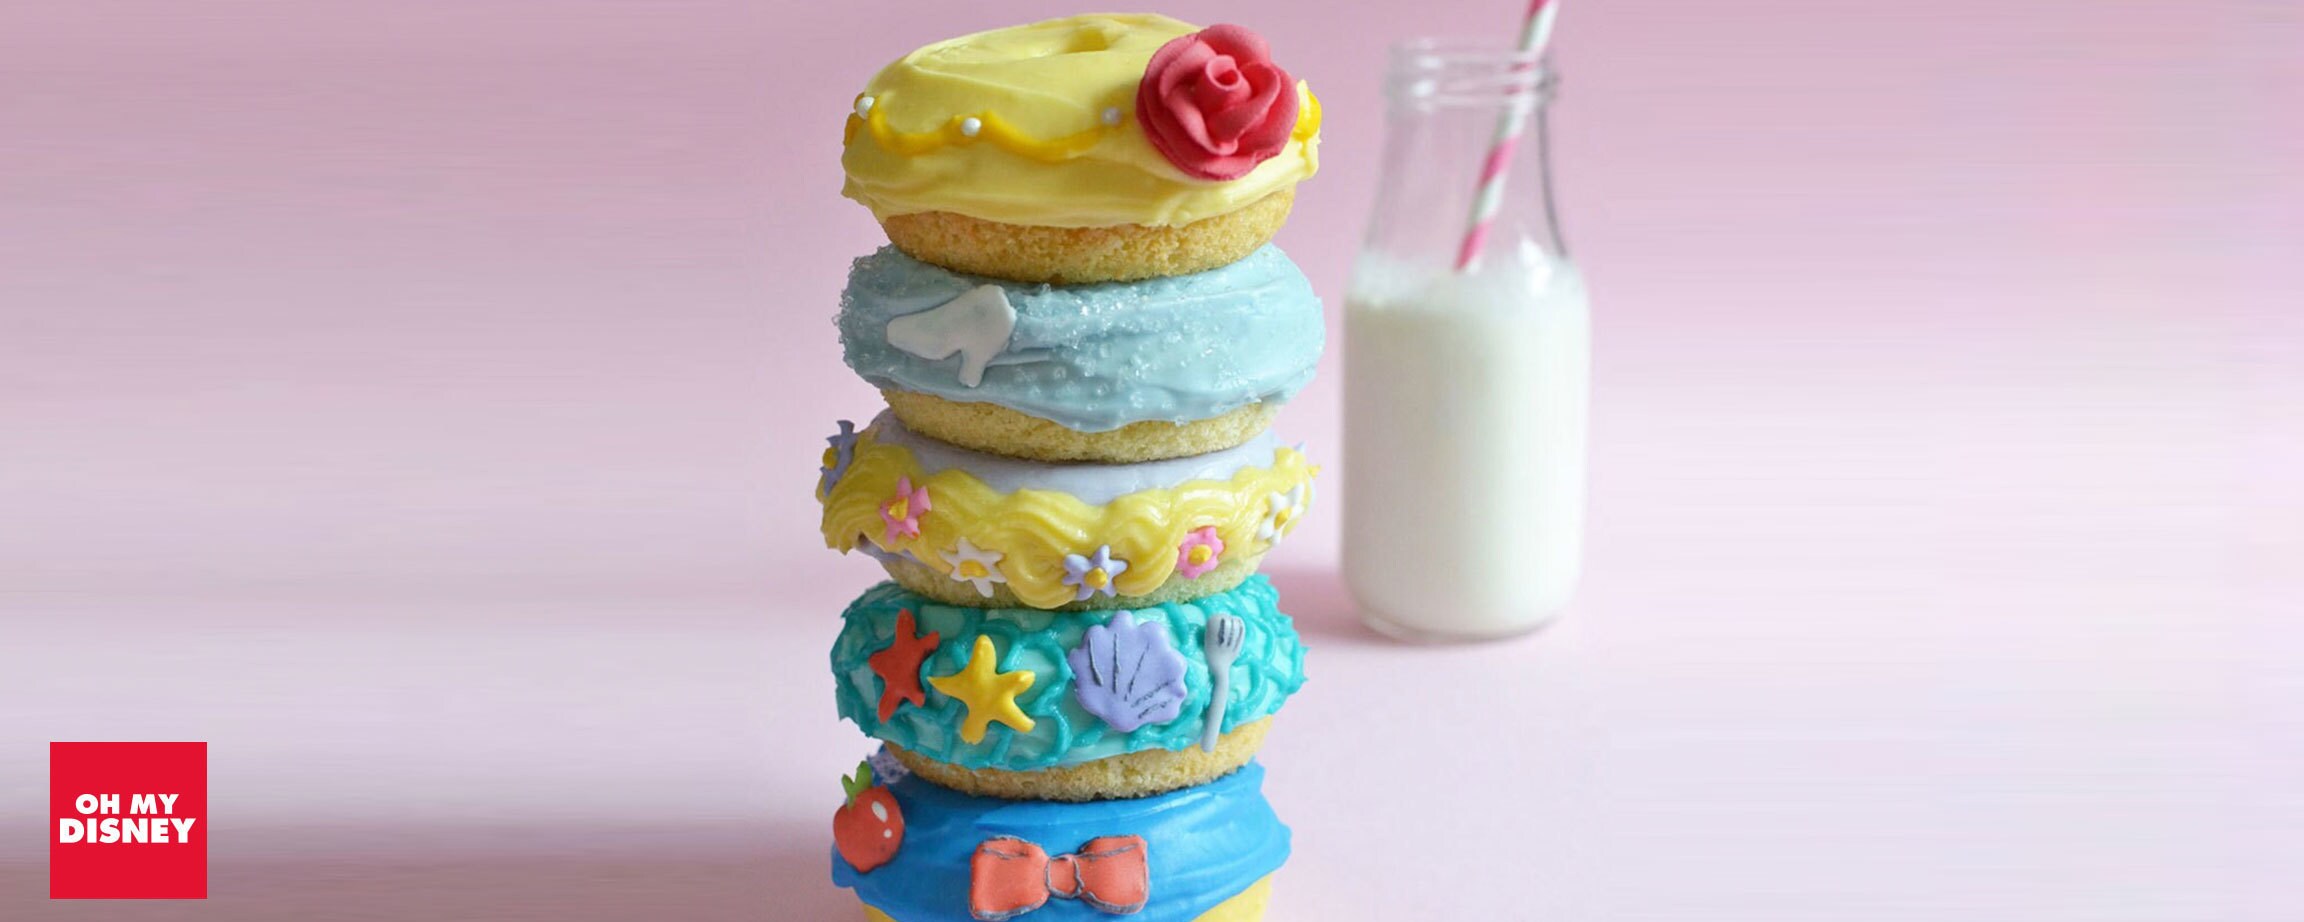 Bake Up These Donuts for Your Little Disney Princess